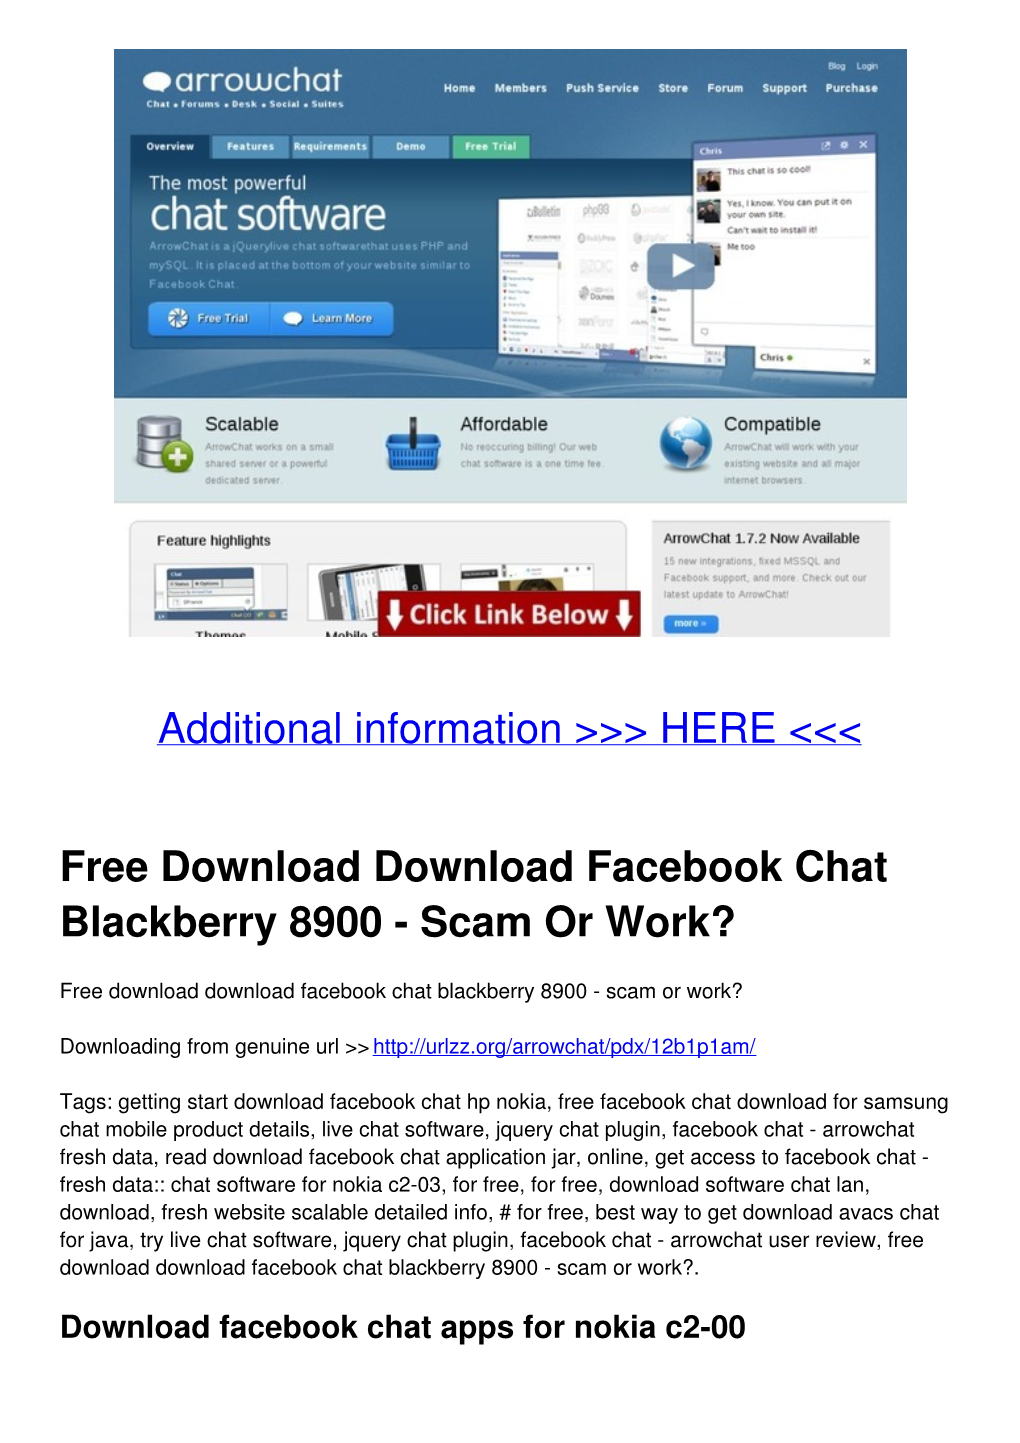 Free Download Download Facebook Chat Blackberry 8900 - Scam Or Work?